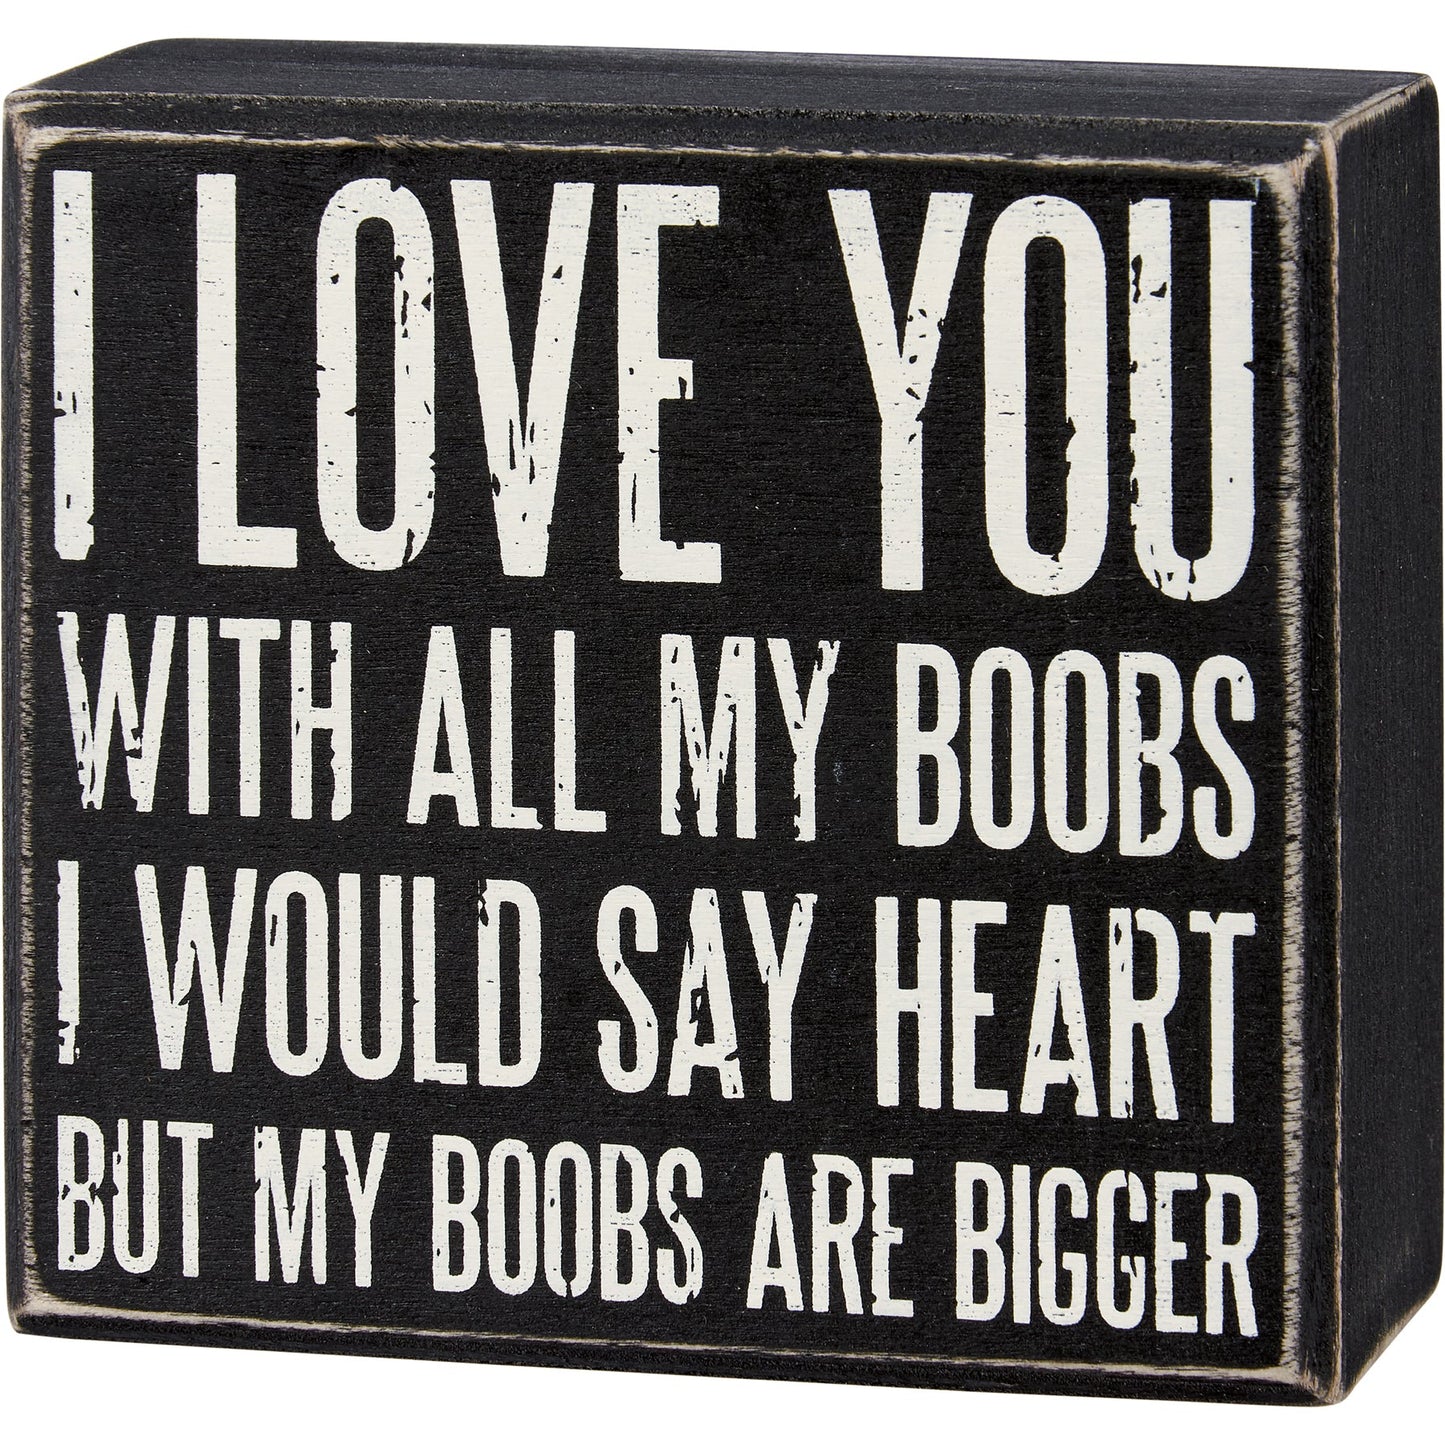 I Love You With All My Boobs - I Would Say Heart But My Boobs Are Bigger Wooden Box Sign Decor | 4.50" x 4.25"